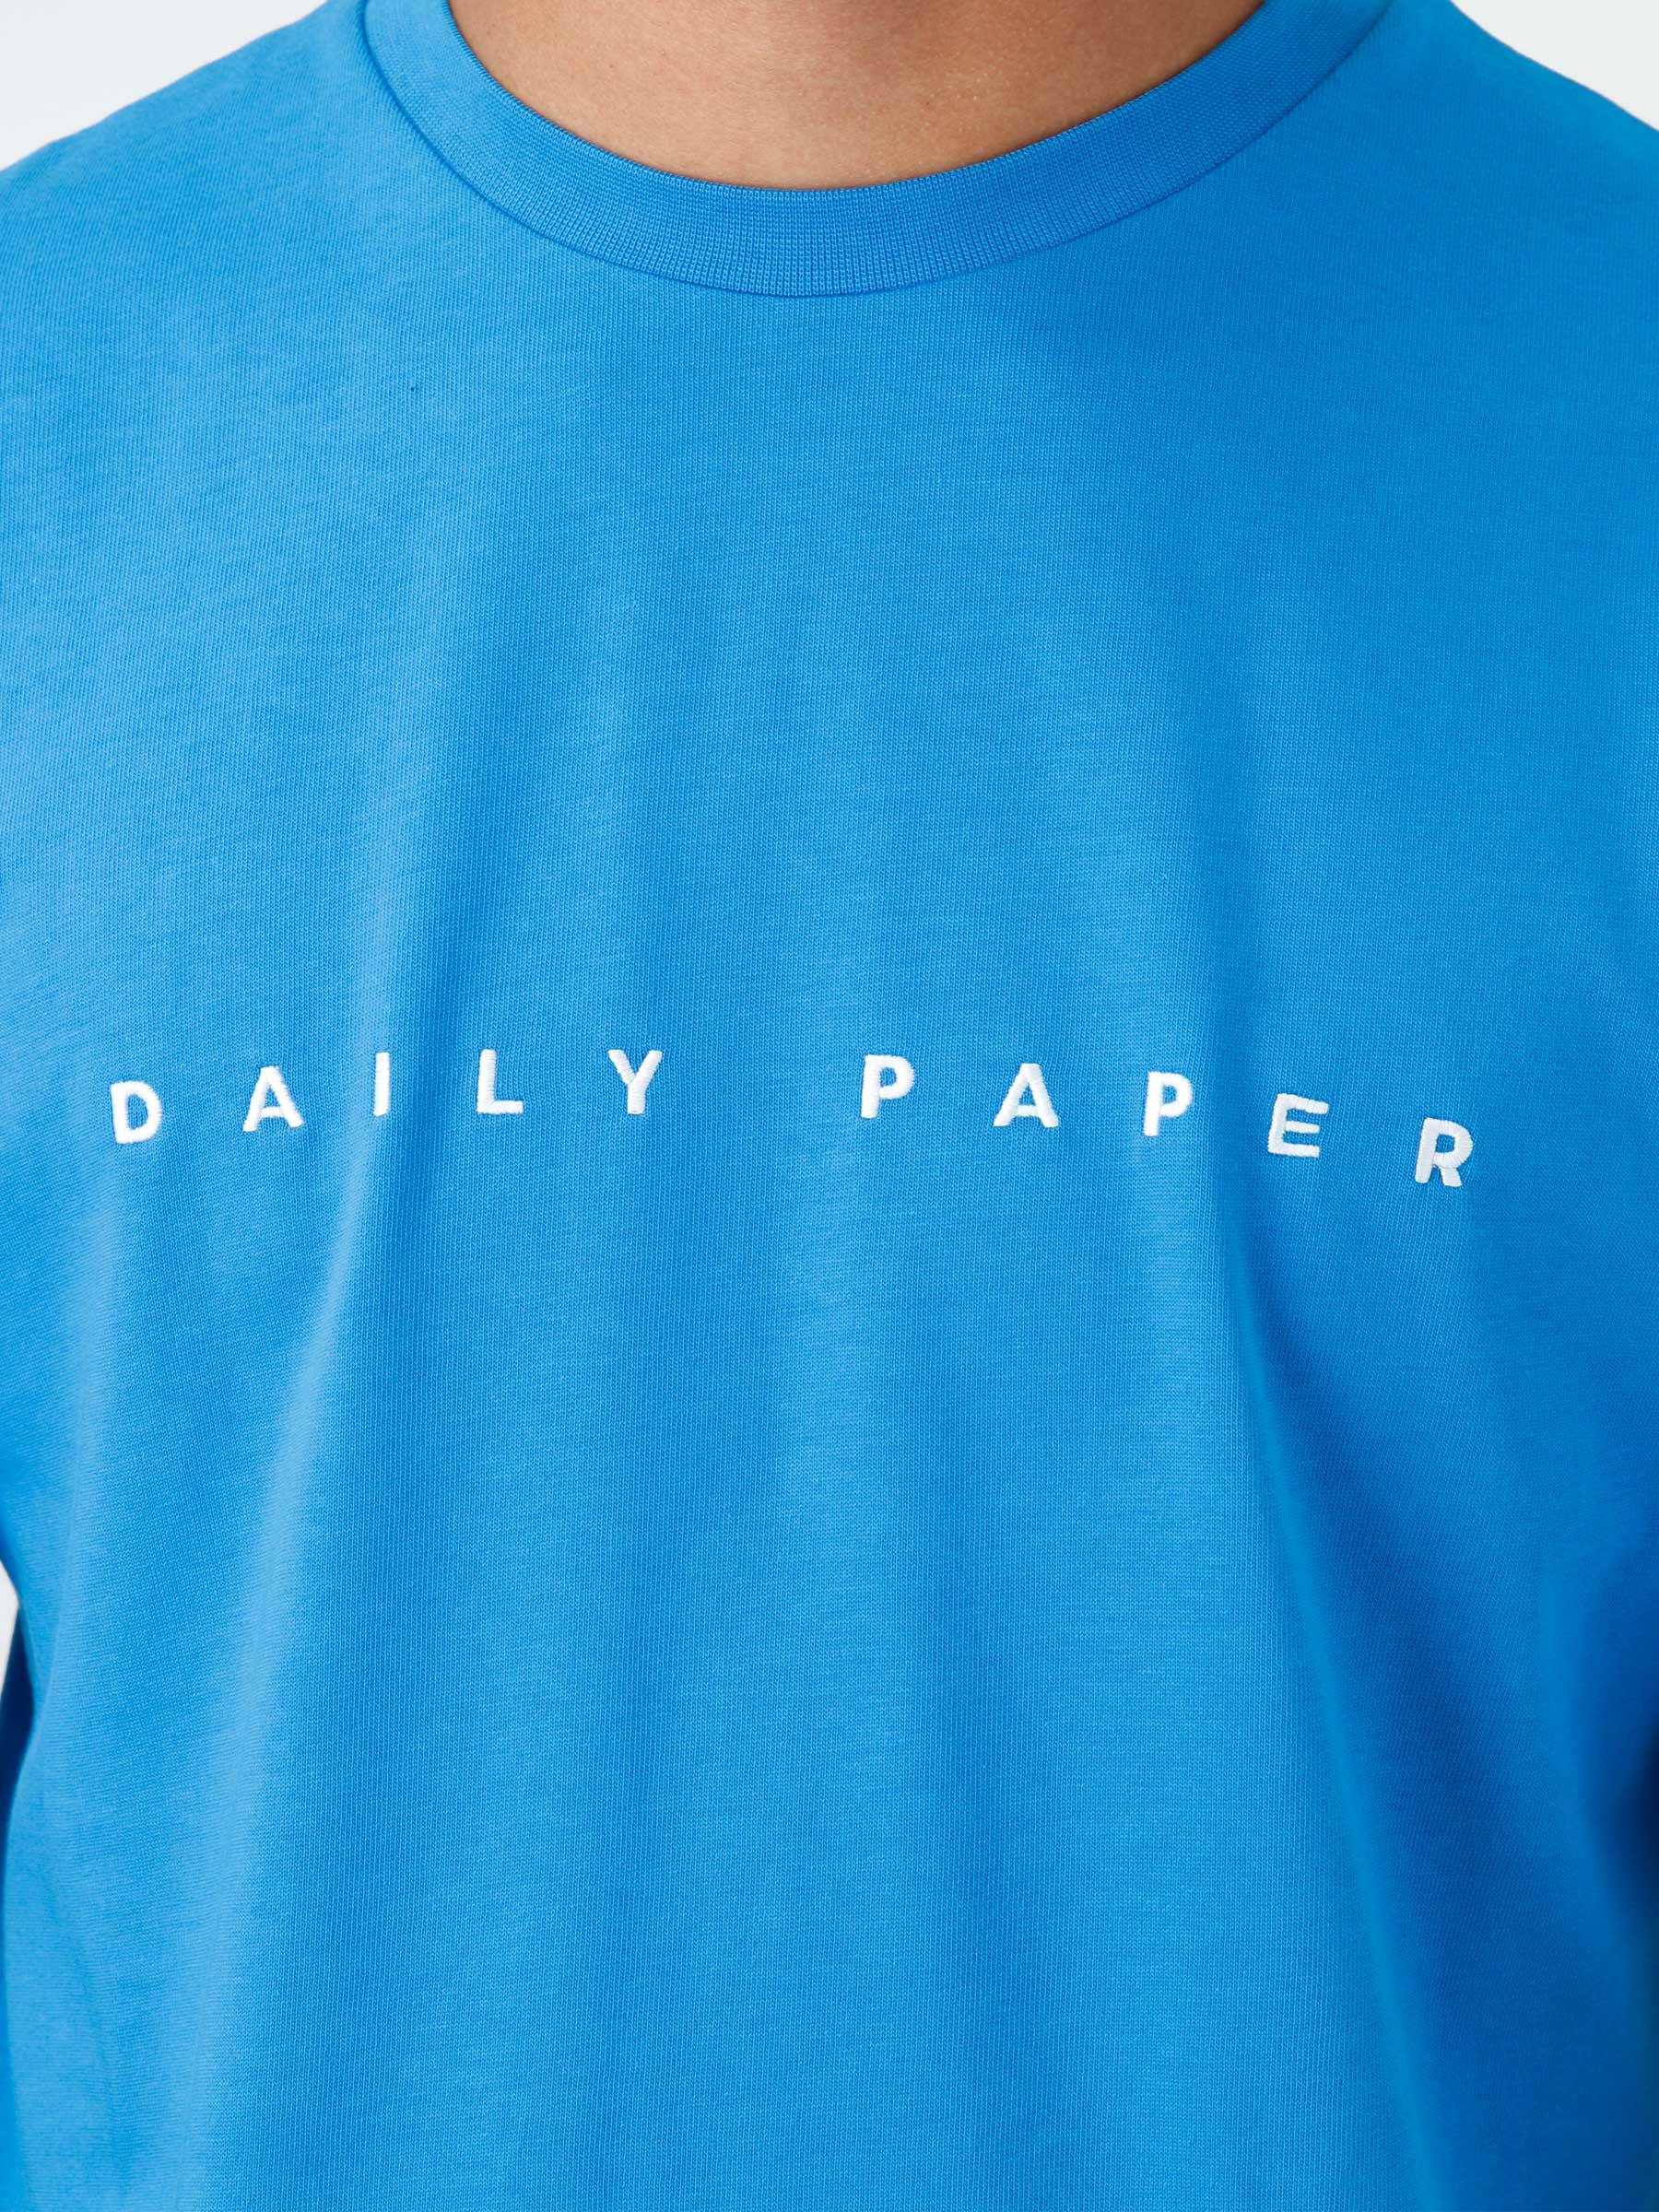 Daily Paper Men's French Blue Alias Logo Cotton T-shirt, Size X-Small  2222042-FRENCH BLUE - Jomashop